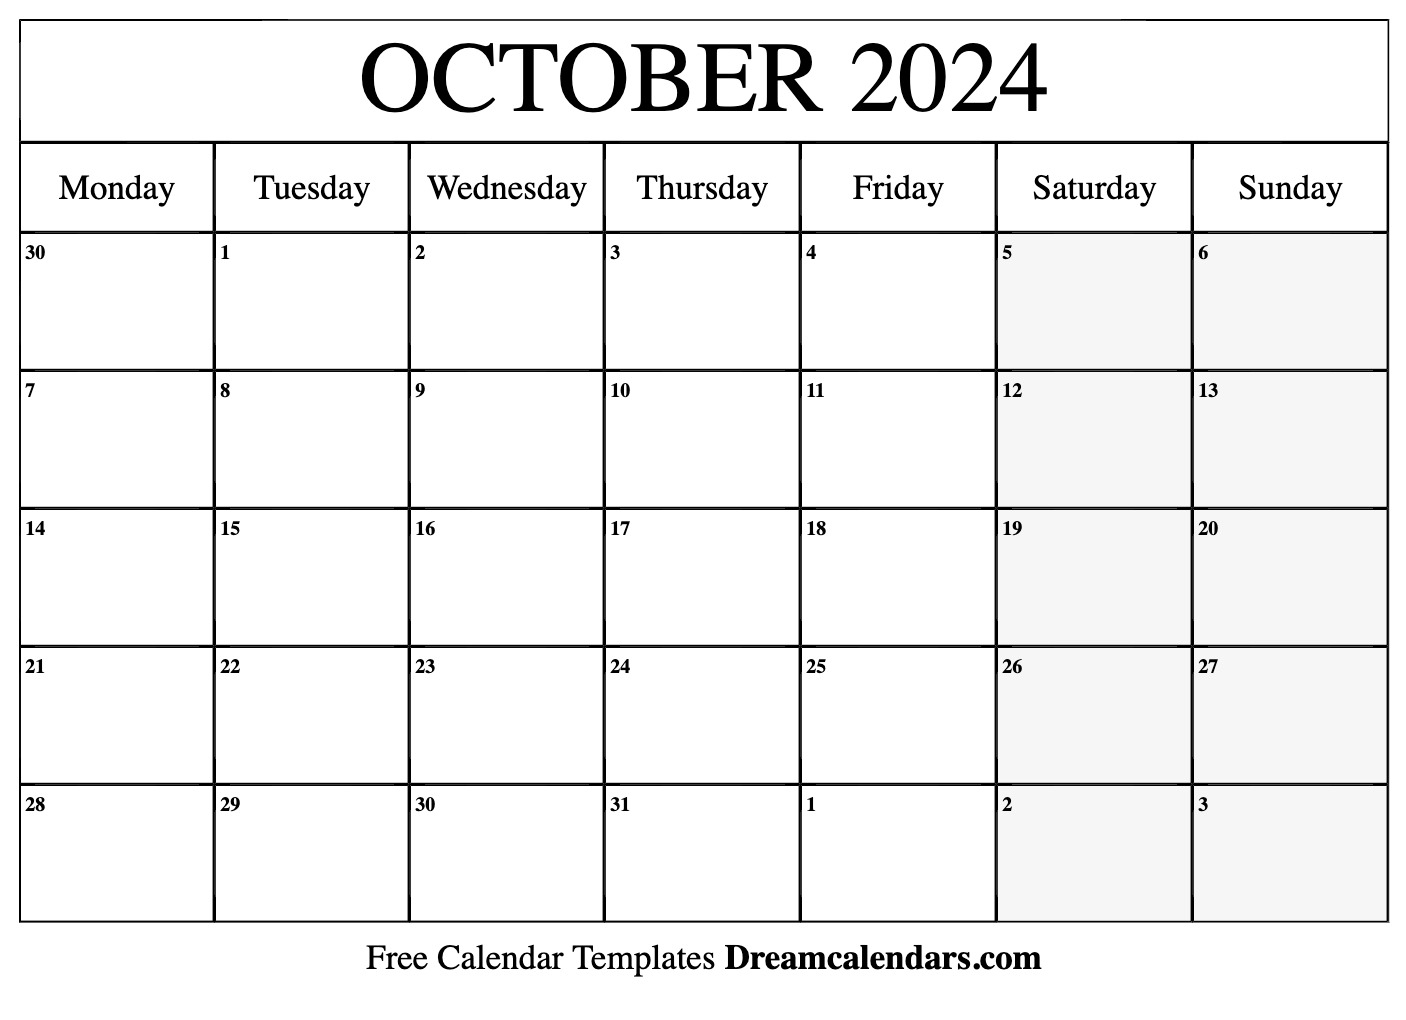 October 2024 Calendar | Free Blank Printable With Holidays for Free Printable Calendar 2024 October